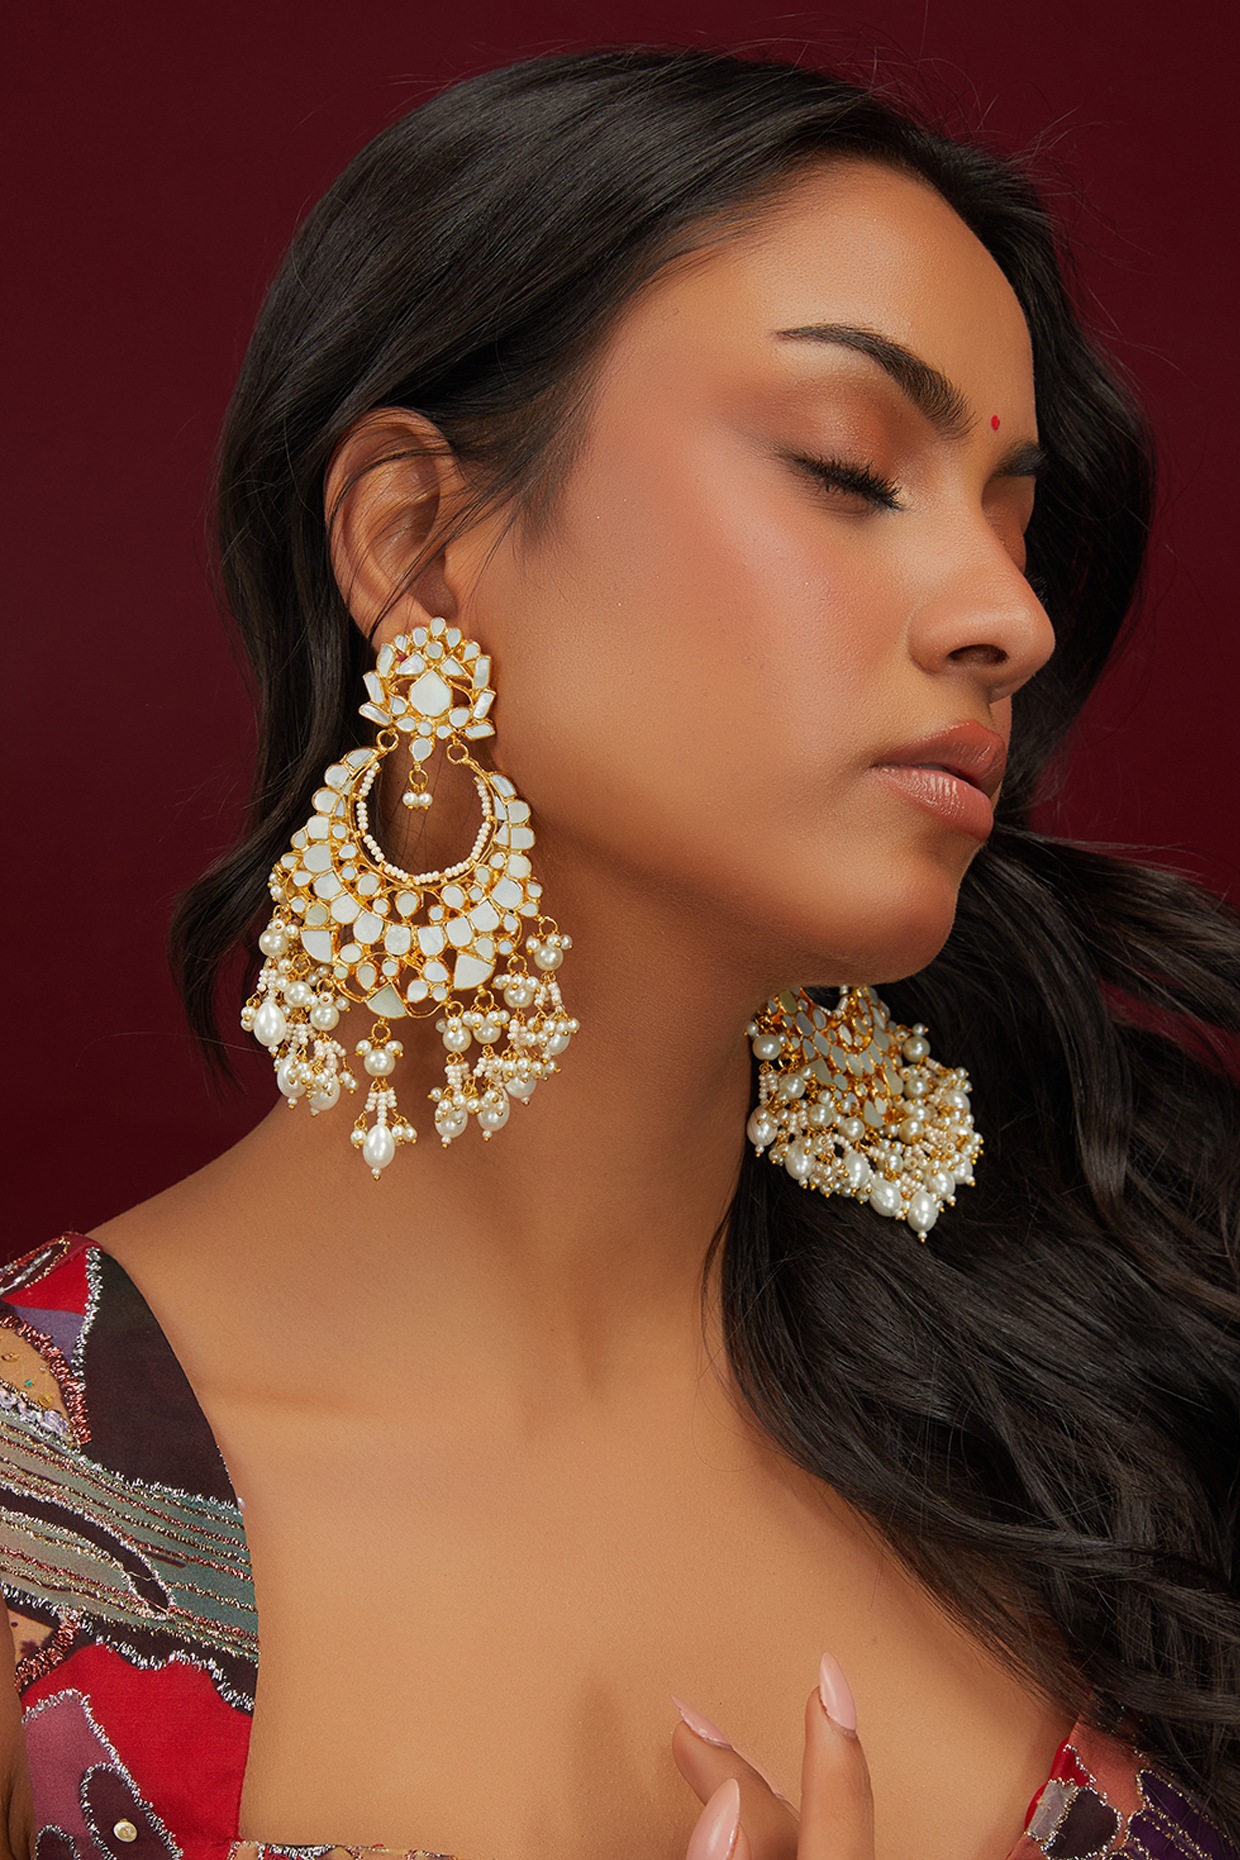 Define Your Style with Jewelry America's Earrings Collection